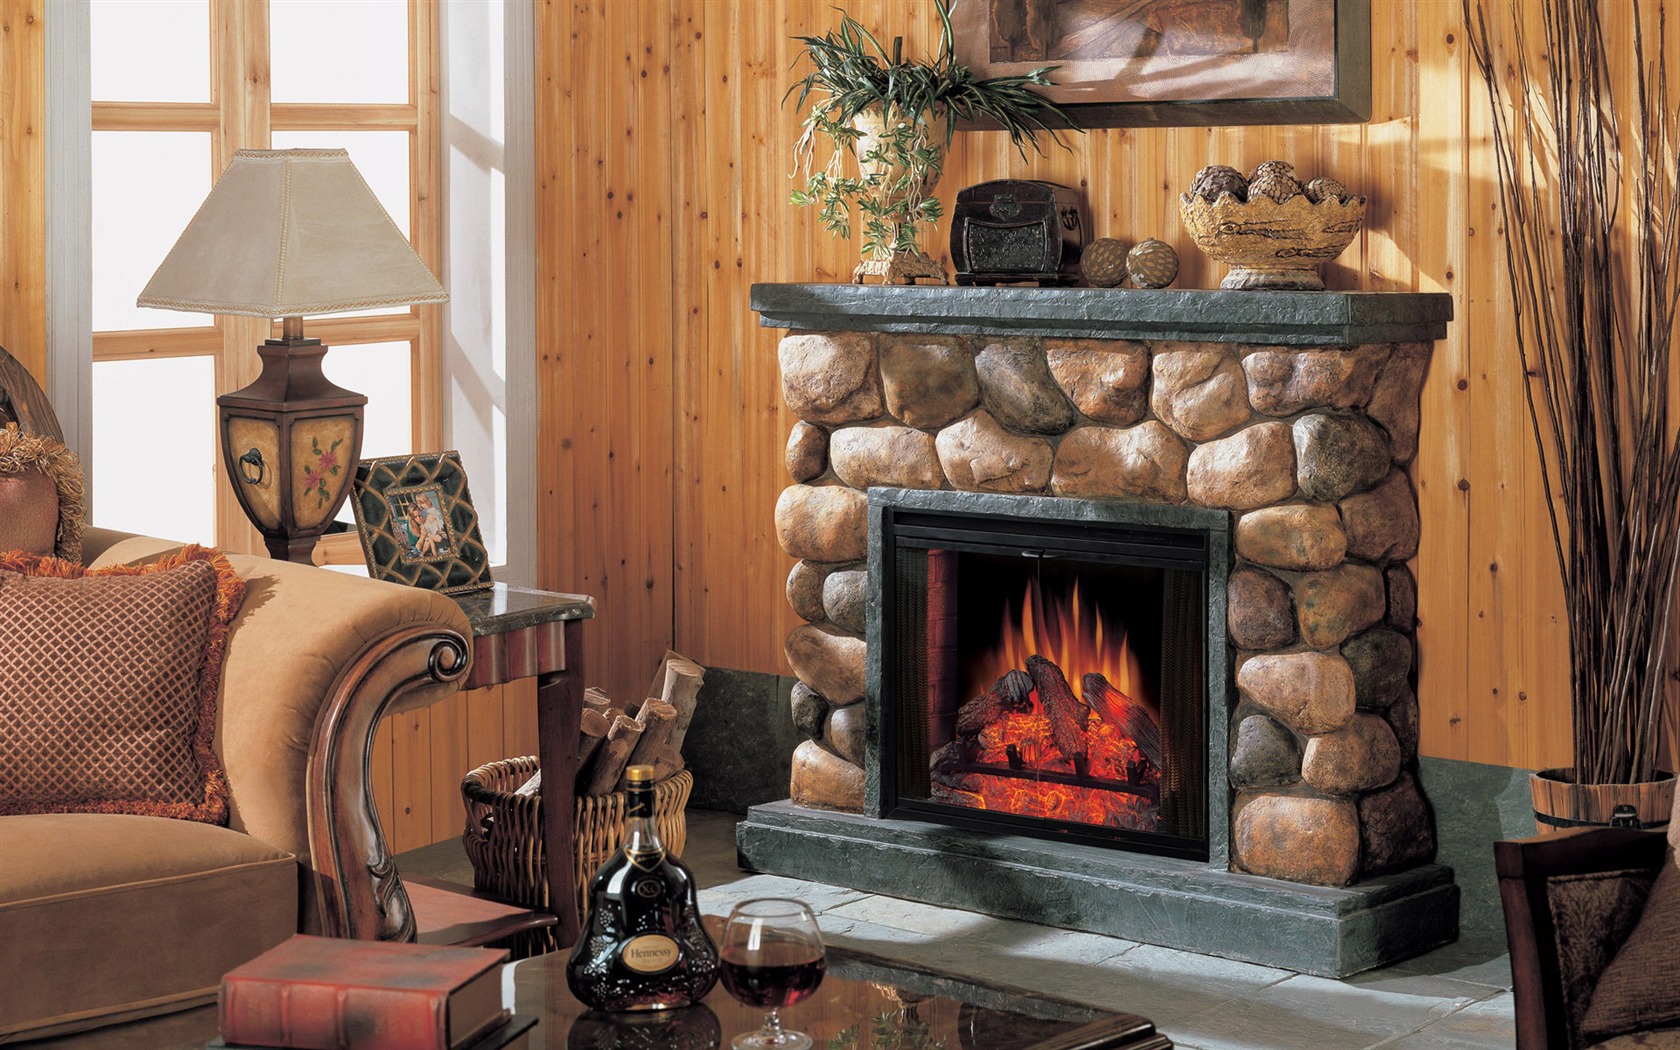 Western-style family fireplace wallpaper (1) #2 - 1680x1050